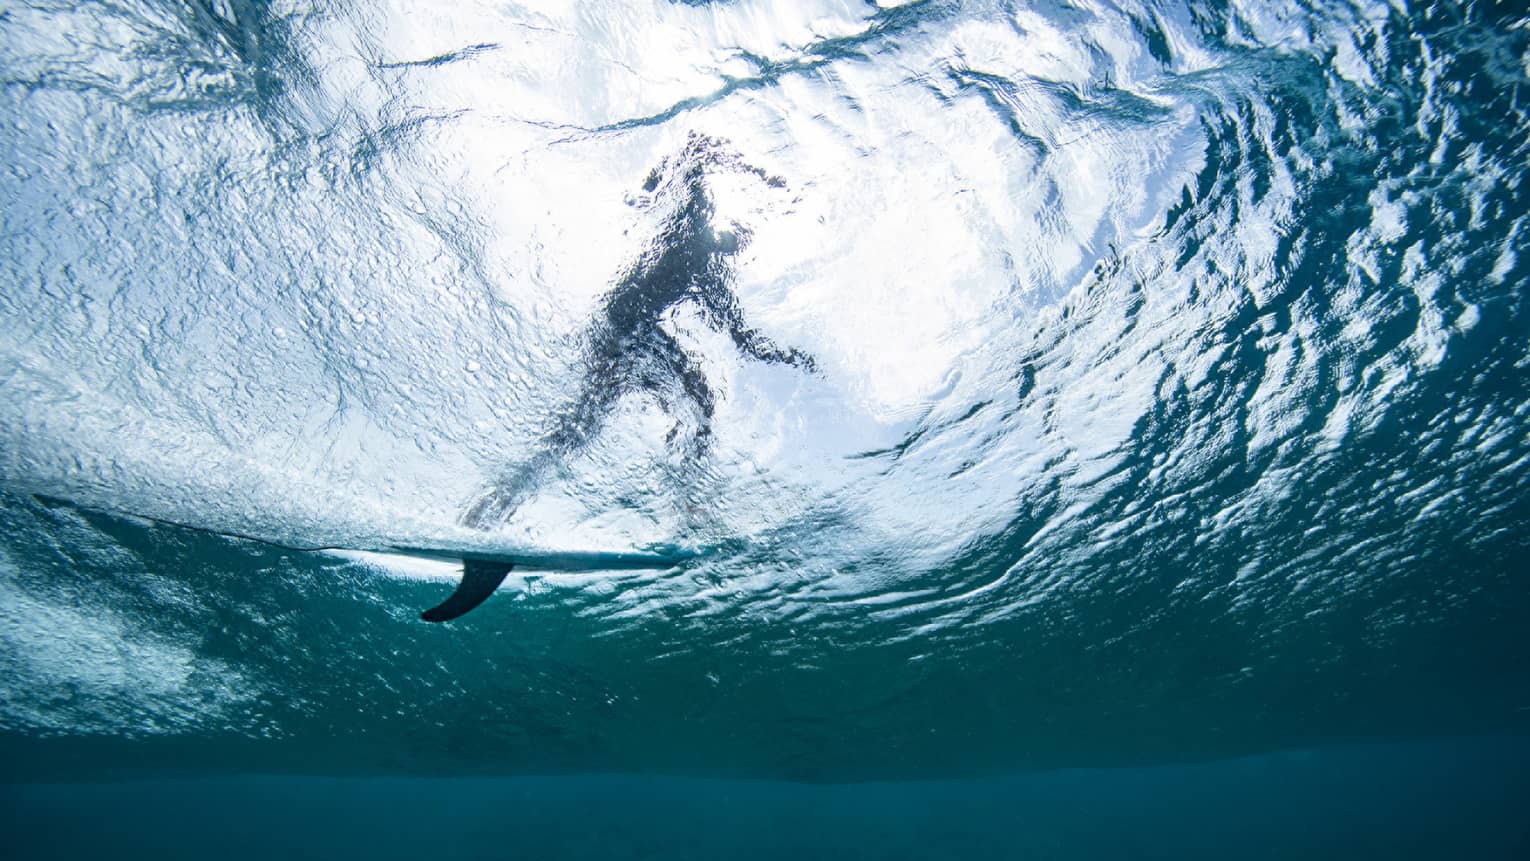 Underwater shot of surfer catching a wave